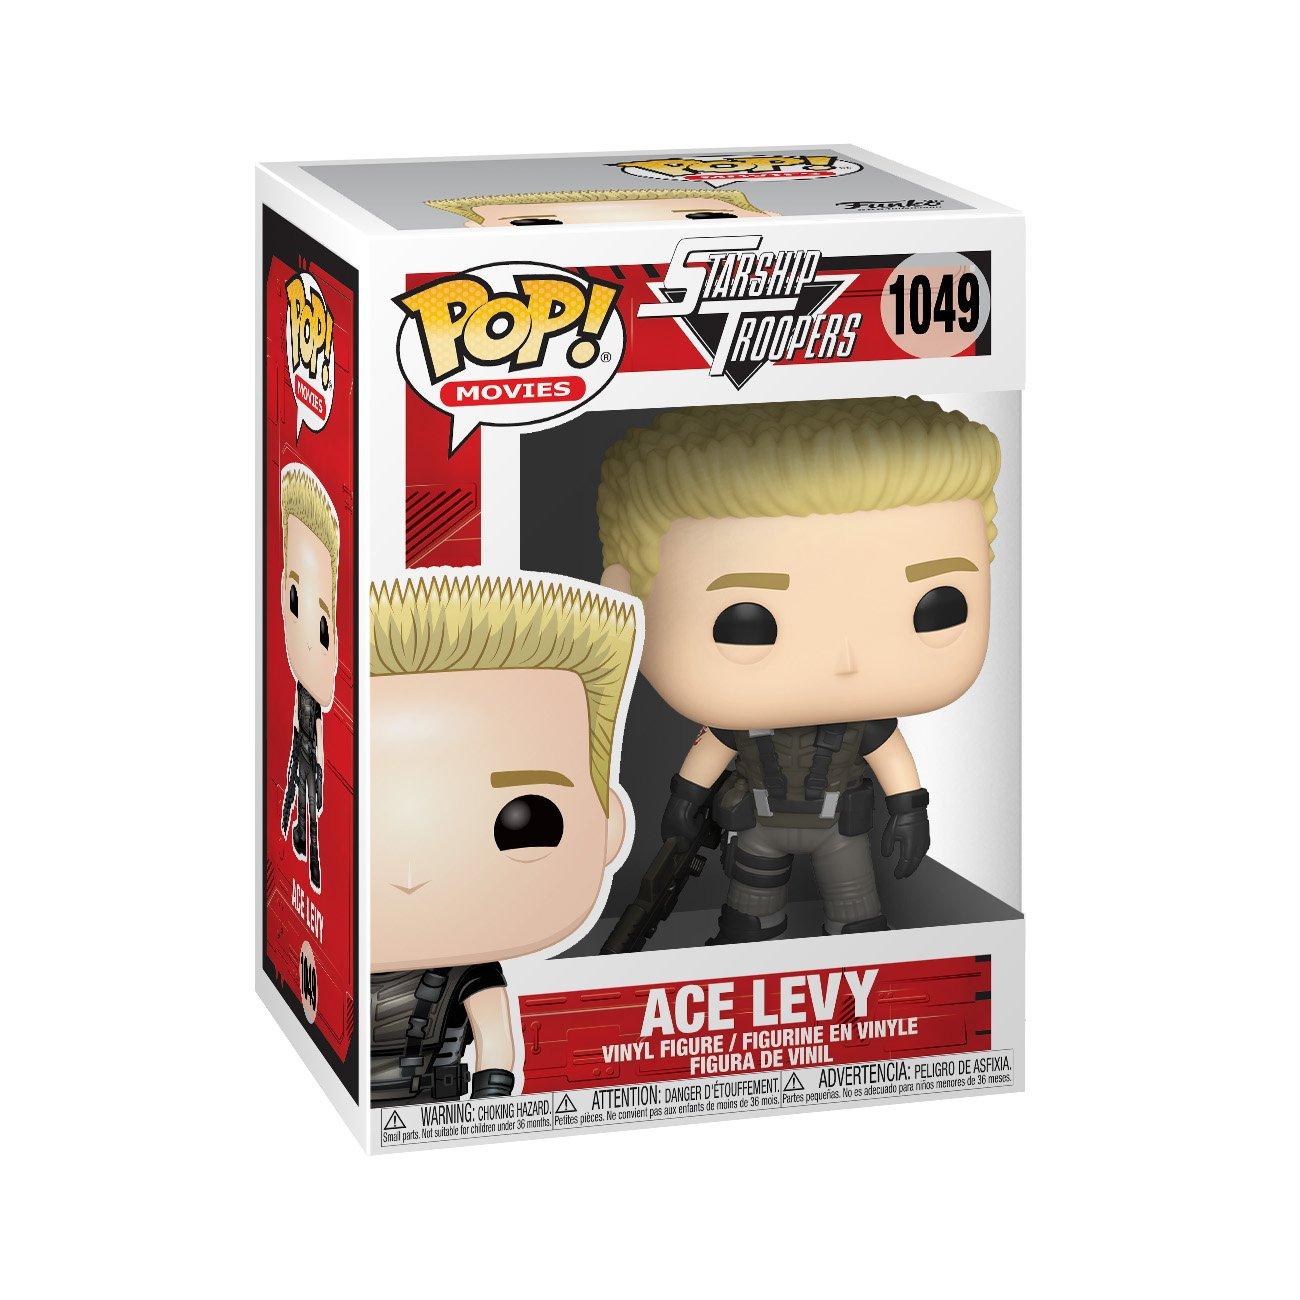 list item 2 of 2 POP! Movies: Starship Troopers Ace Levy